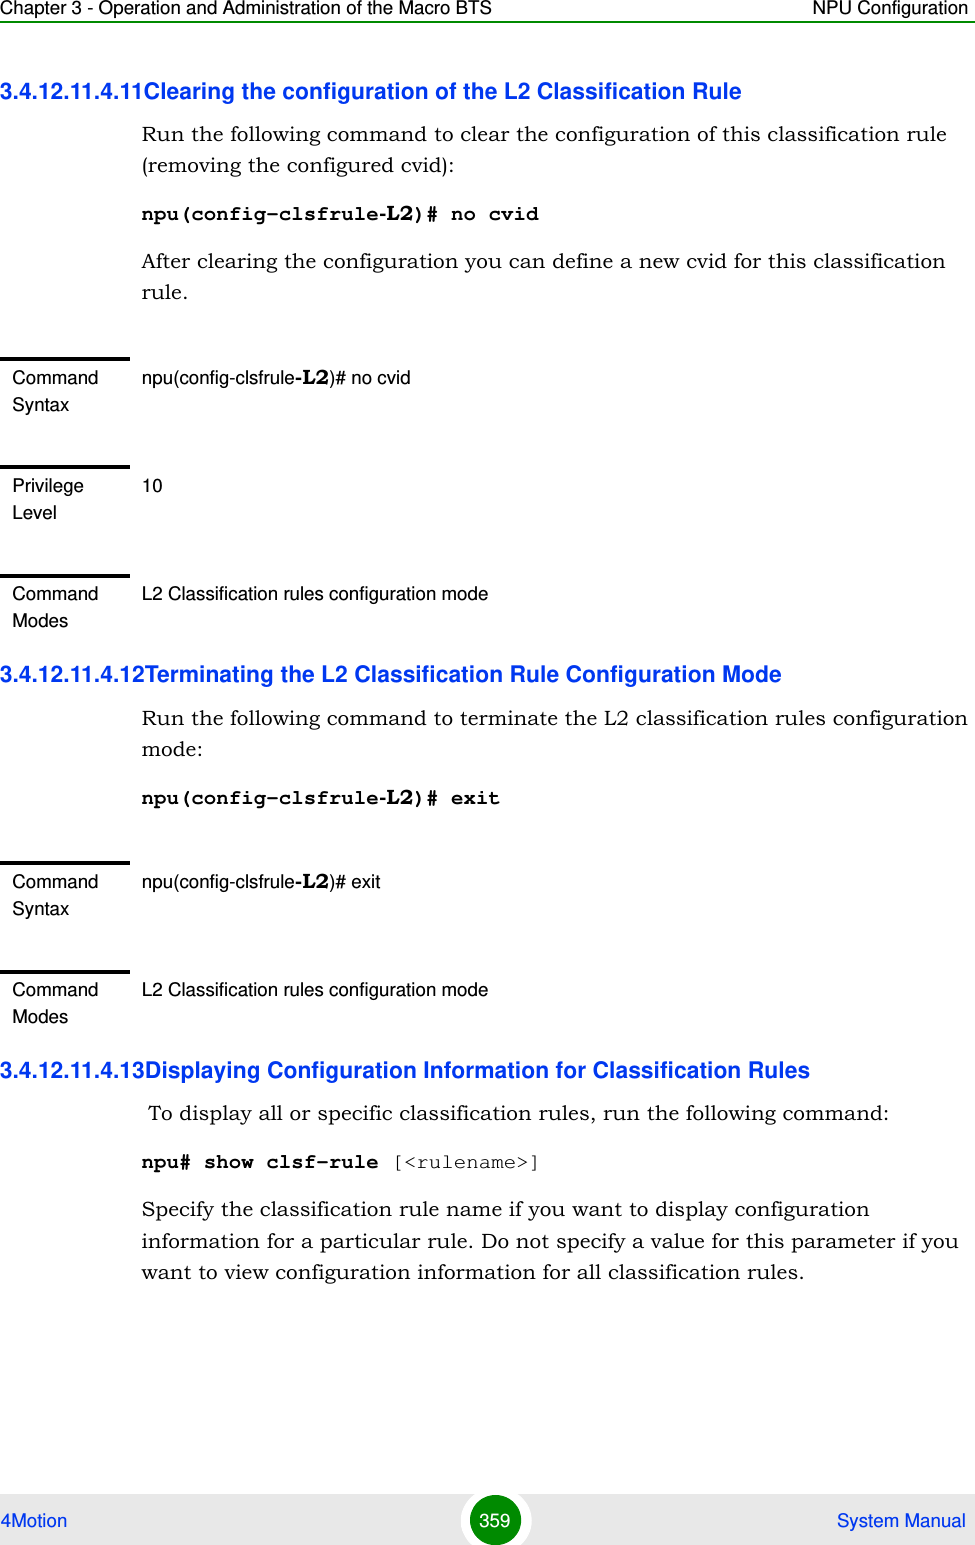 Chapter 3 - Operation and Administration of the Macro BTS NPU Configuration4Motion 359  System Manual3.4.12.11.4.11Clearing the configuration of the L2 Classification RuleRun the following command to clear the configuration of this classification rule (removing the configured cvid):npu(config-clsfrule-L2)# no cvidAfter clearing the configuration you can define a new cvid for this classification rule.3.4.12.11.4.12Terminating the L2 Classification Rule Configuration ModeRun the following command to terminate the L2 classification rules configuration mode:npu(config-clsfrule-L2)# exit3.4.12.11.4.13Displaying Configuration Information for Classification Rules To display all or specific classification rules, run the following command:npu# show clsf-rule [&lt;rulename&gt;]Specify the classification rule name if you want to display configuration information for a particular rule. Do not specify a value for this parameter if you want to view configuration information for all classification rules.Command Syntaxnpu(config-clsfrule-L2)# no cvidPrivilege Level10Command ModesL2 Classification rules configuration modeCommand Syntaxnpu(config-clsfrule-L2)# exitCommand ModesL2 Classification rules configuration mode